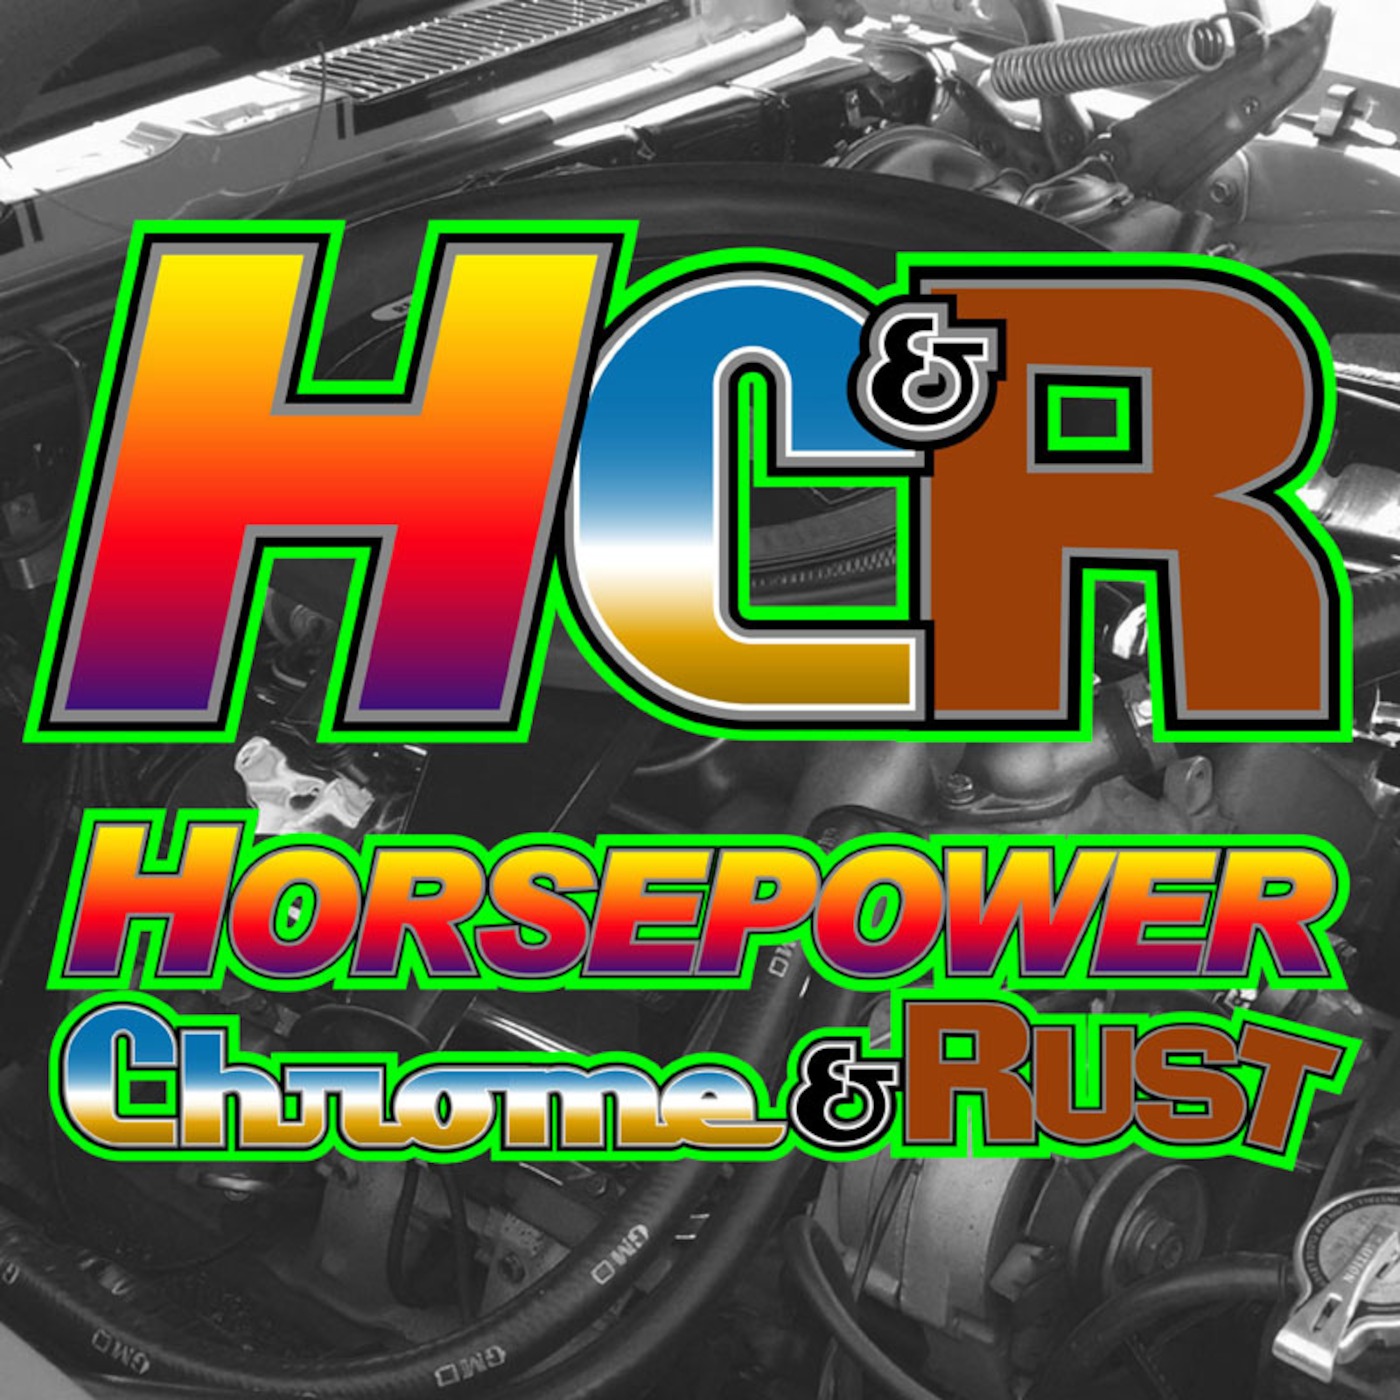 Horsepower Chrome and Rust EP82 Jeff Conwell Monsters in Manson Car Show & More April 23 2019